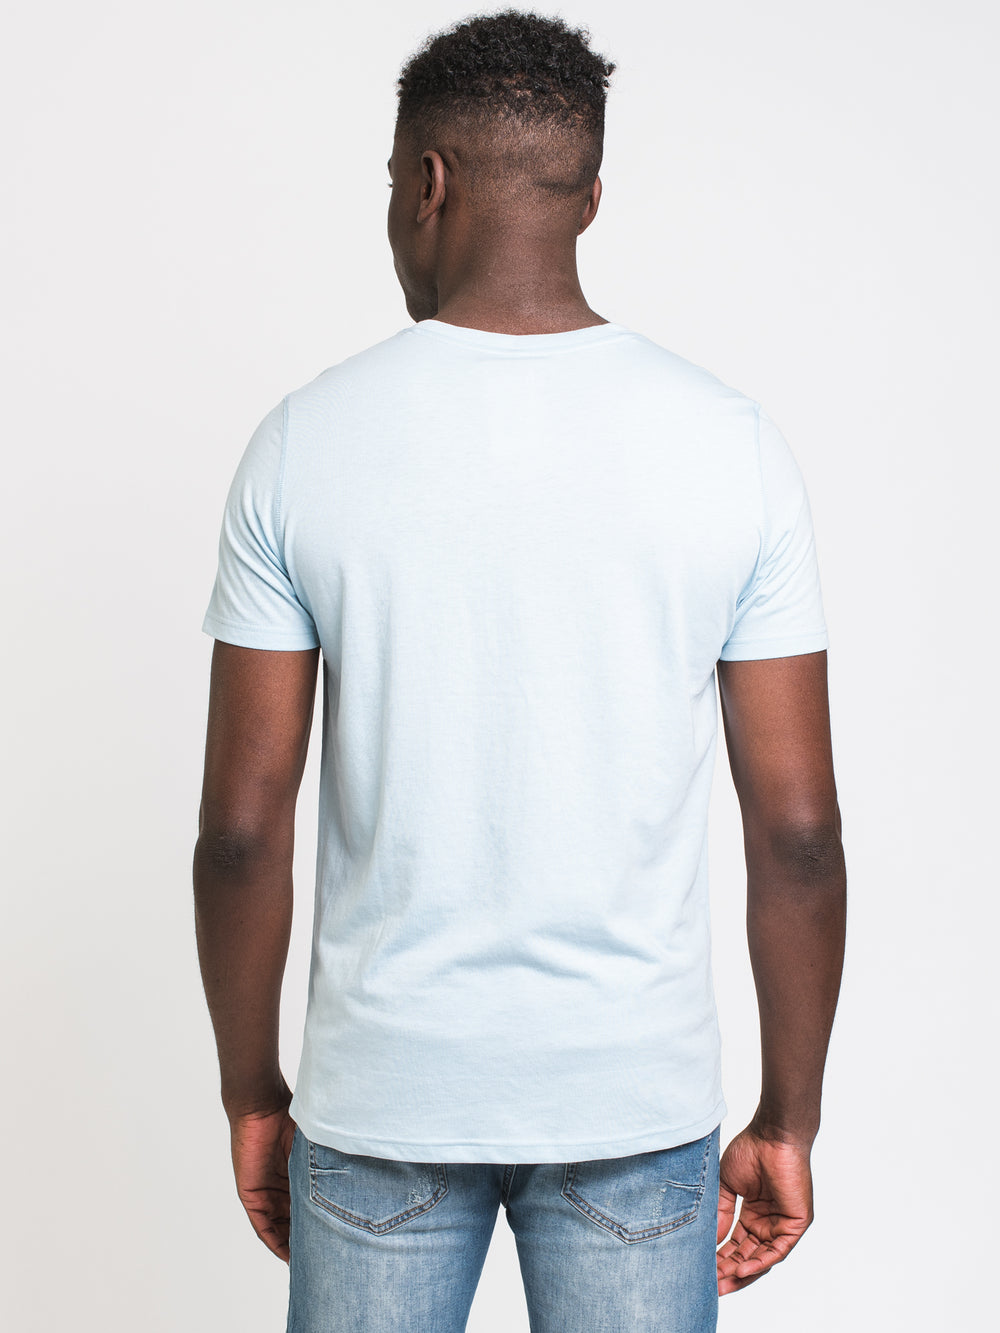 BOATHOUSE VICTOR V-NECK TEE - CLEARANCE